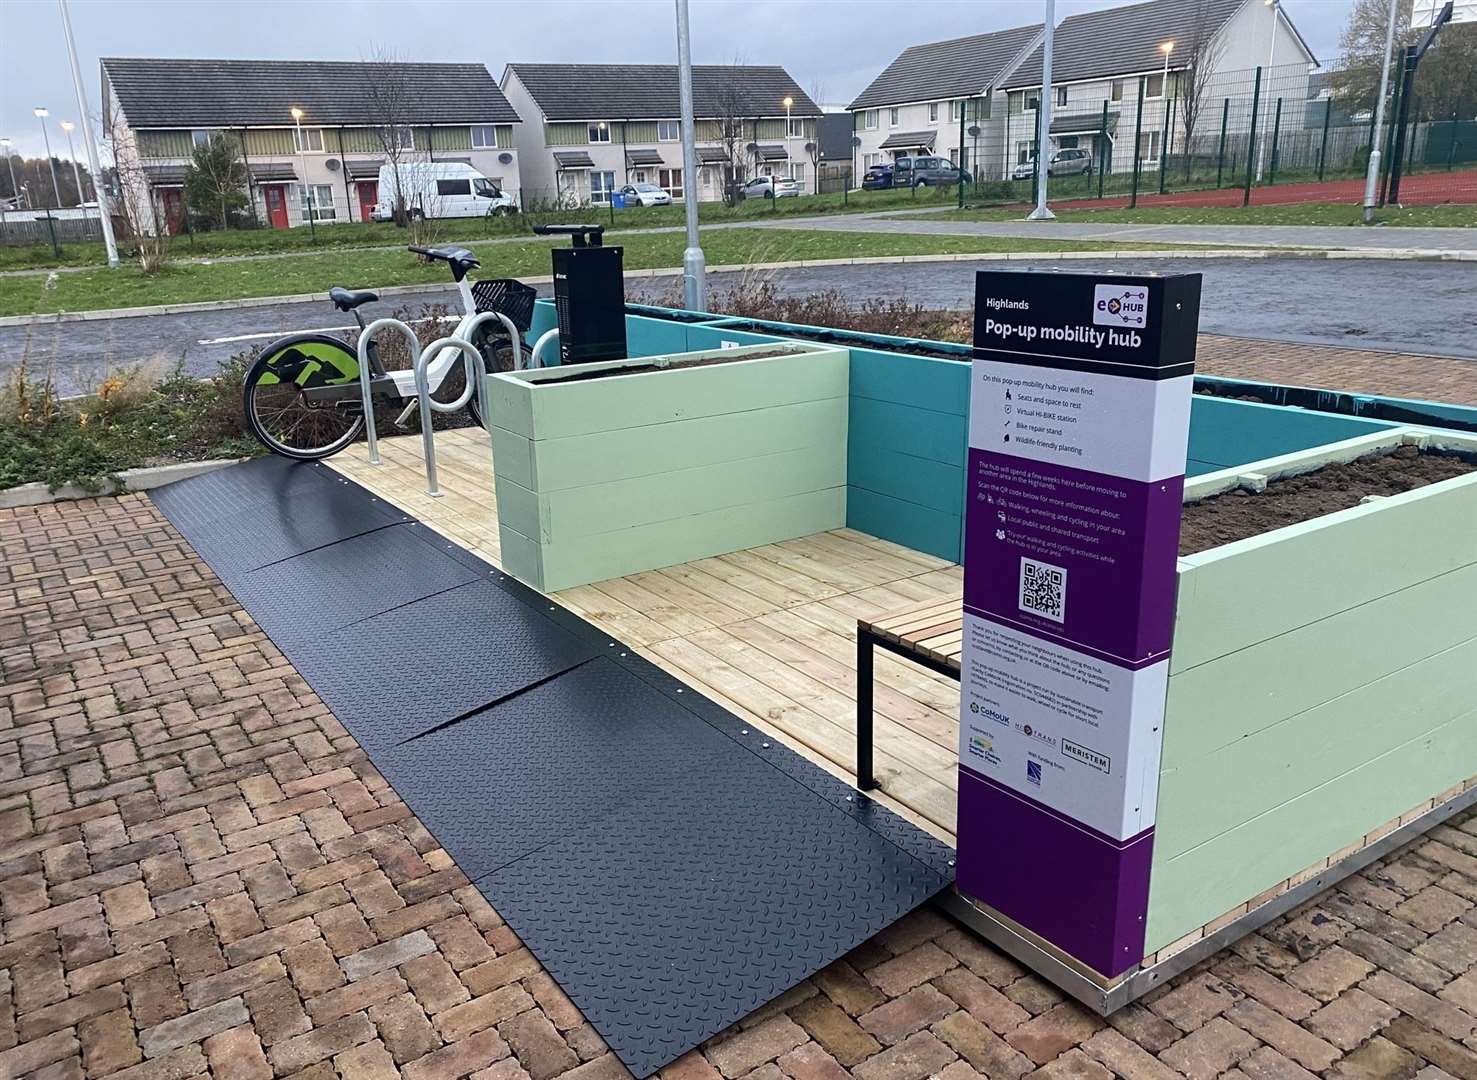 The pop-up mobility hub at Merkinch Primary School is the size of one large car.